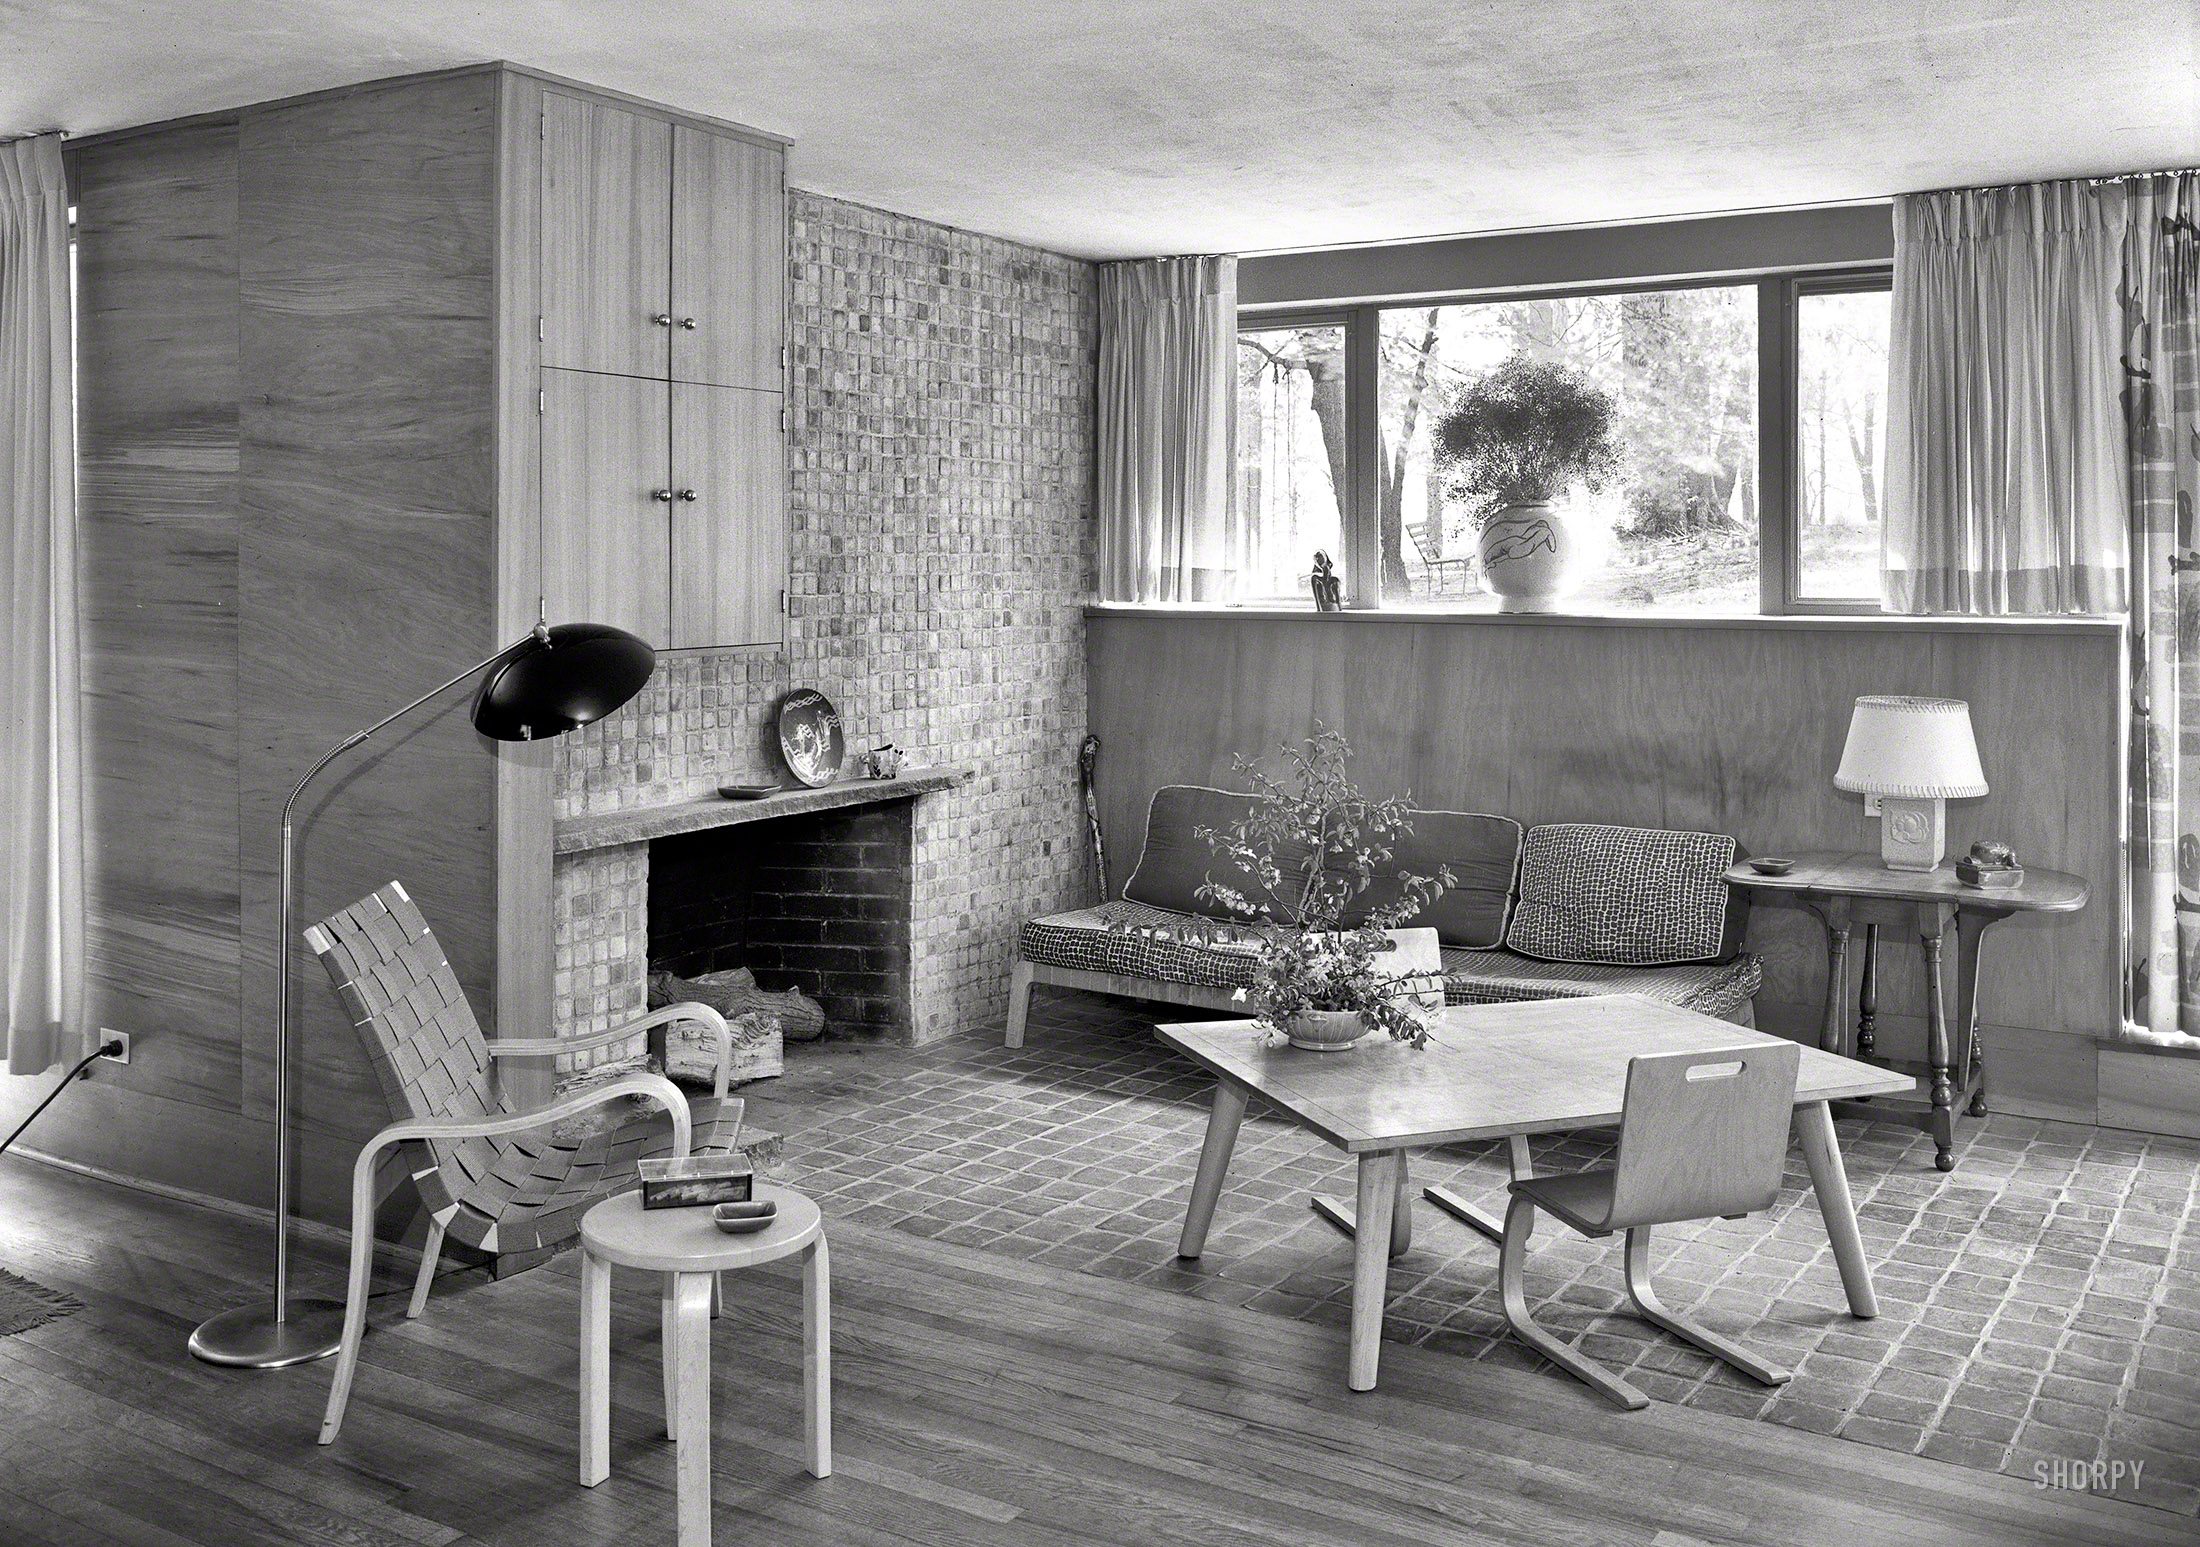 May 4, 1944. "Jesse Oser residence, Elkins Park, Pennsylvania. Louis I. Kahn, architect. Living room to fireplace." With a nice view of the avant-garden. Large-format acetate negative by Gottscho-Schleisner. View full size.